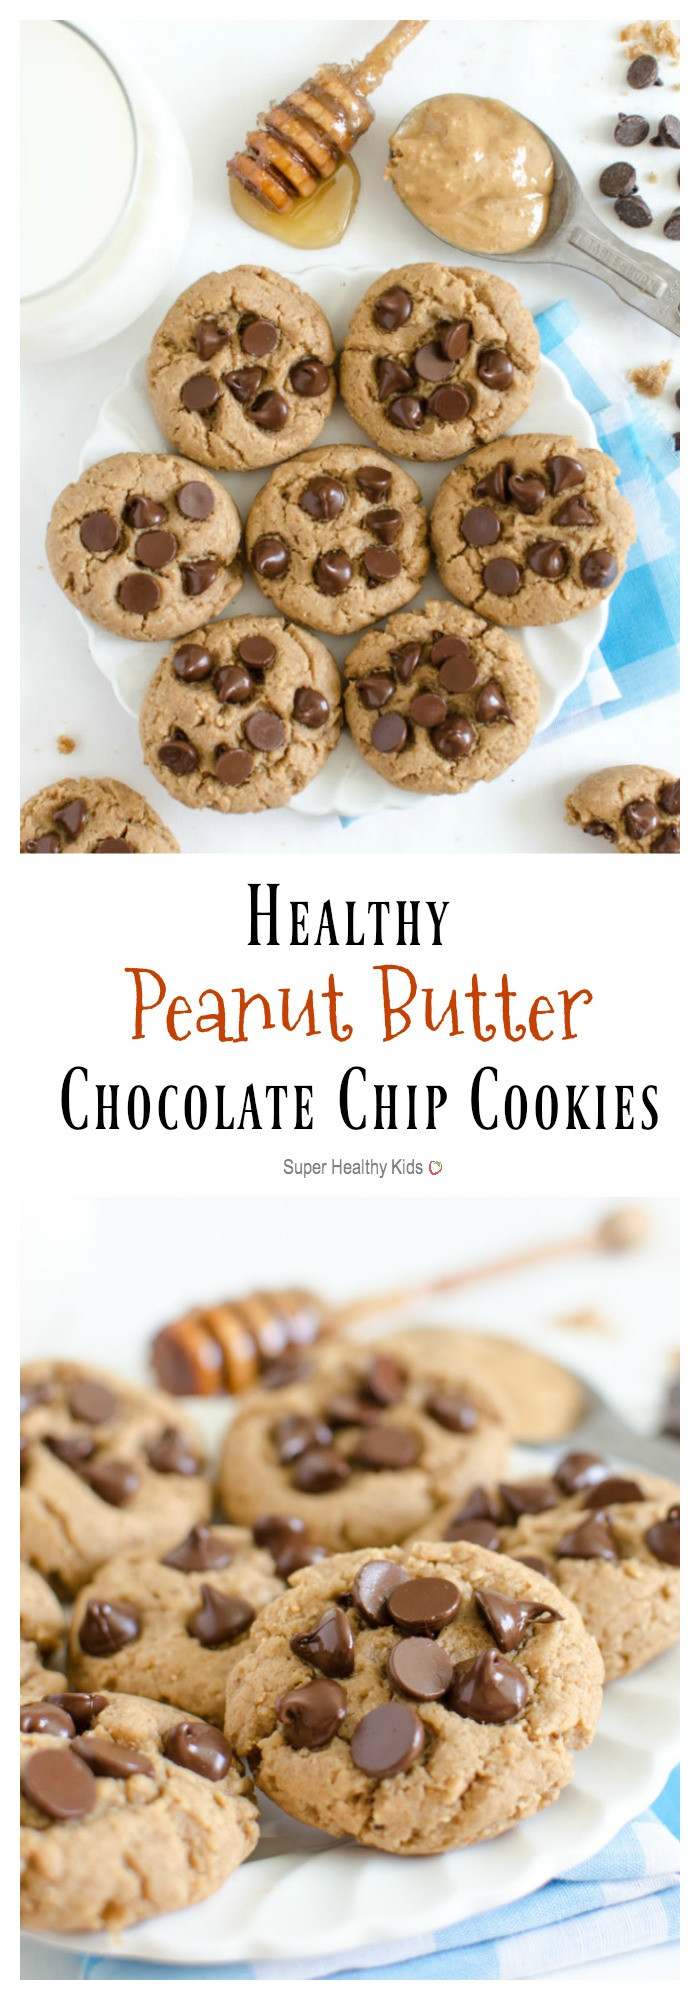 Healthy Peanut Butter Cookies
 Peanut Butter Chocolate Chip Cookies